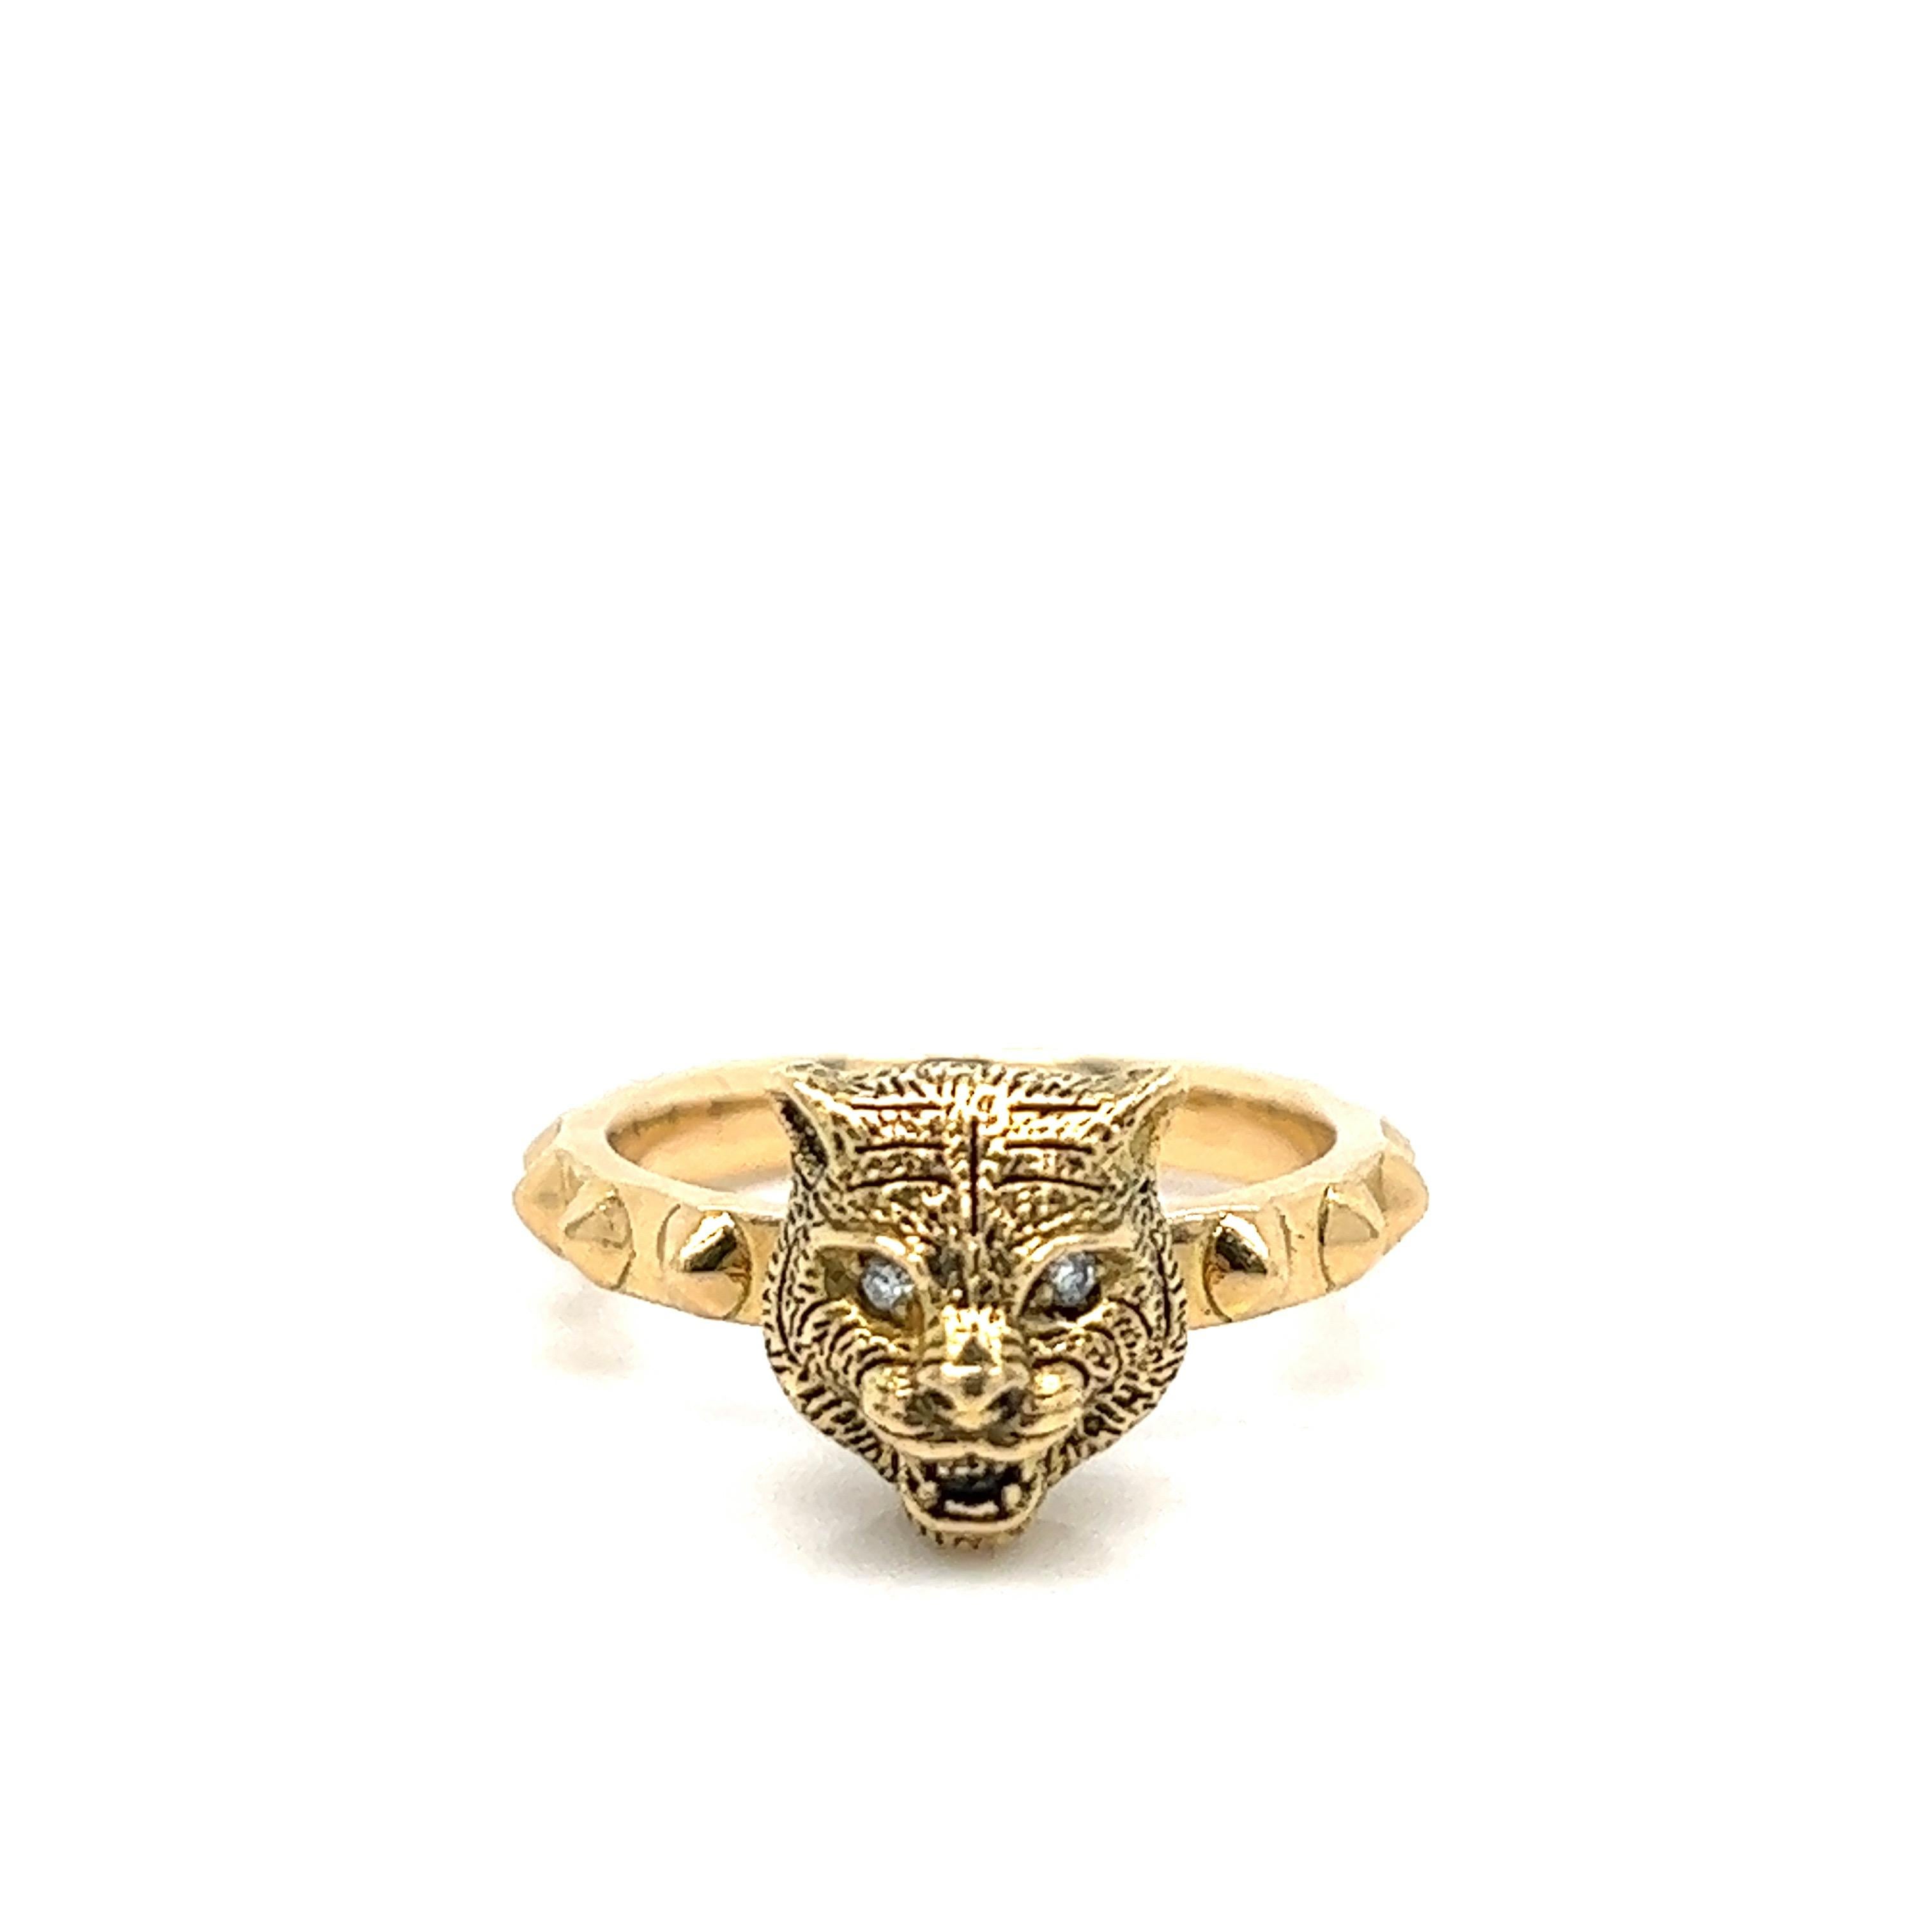 Gucci 18 karat yellow gold band ring; marked Gucci, made in Italy, Au750, 11 

Feline motif for the head with eyes of round-cut diamonds of 0.20 carat; size of head: width 9 mm, length 10 mm

Size: 5.5
Total weight: 7.5 grams 